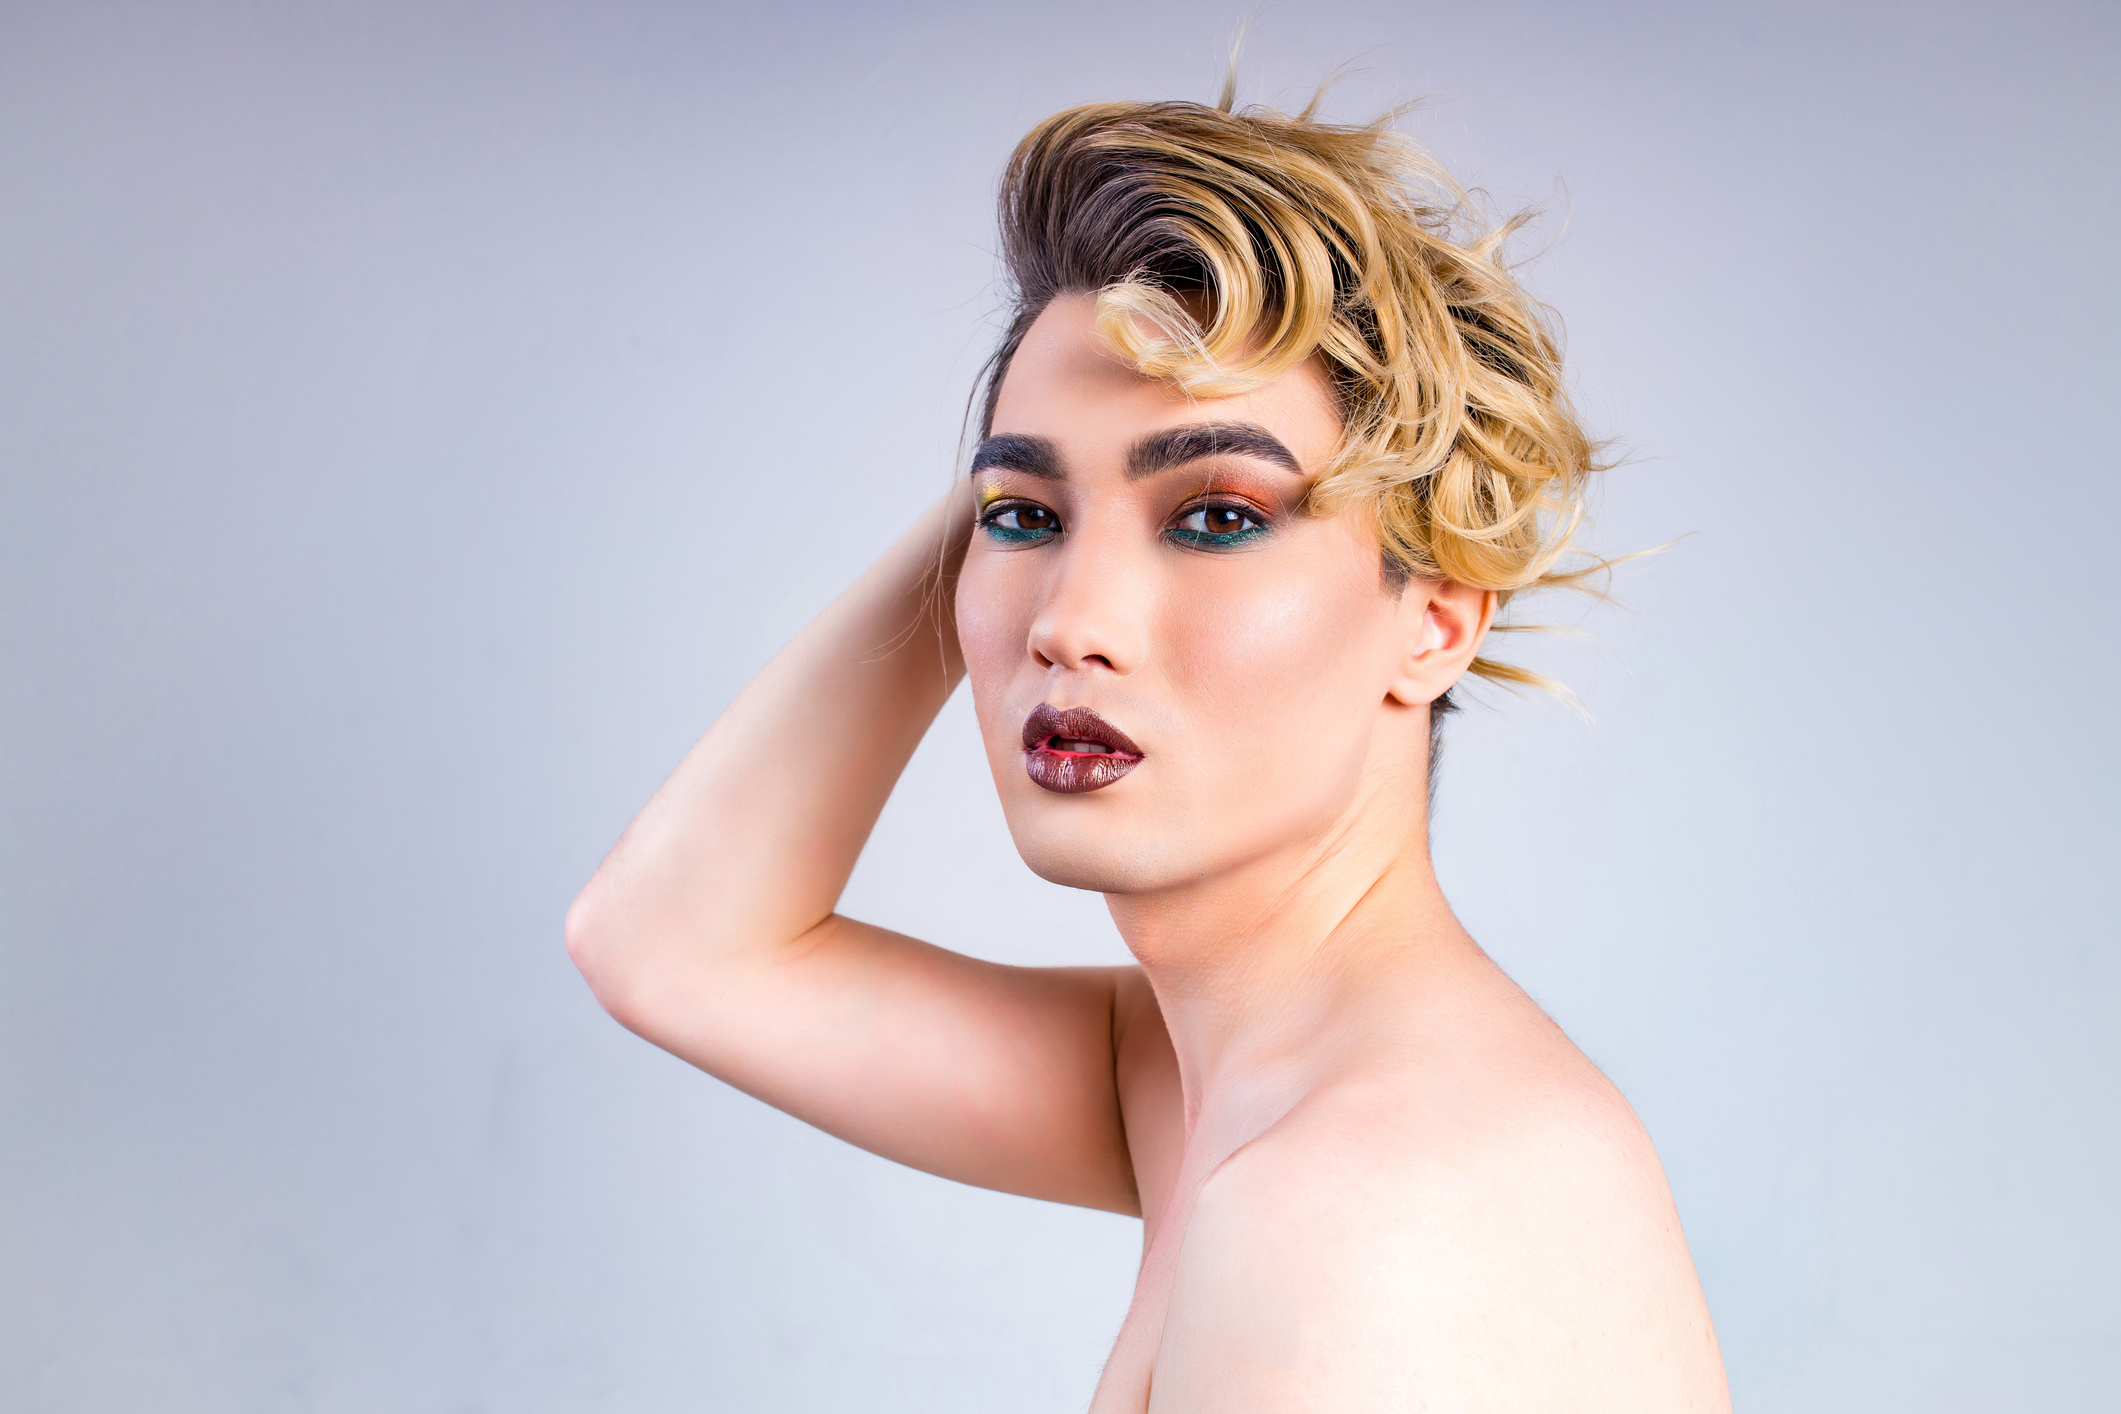 blond man with make up on face posing in studio on white background